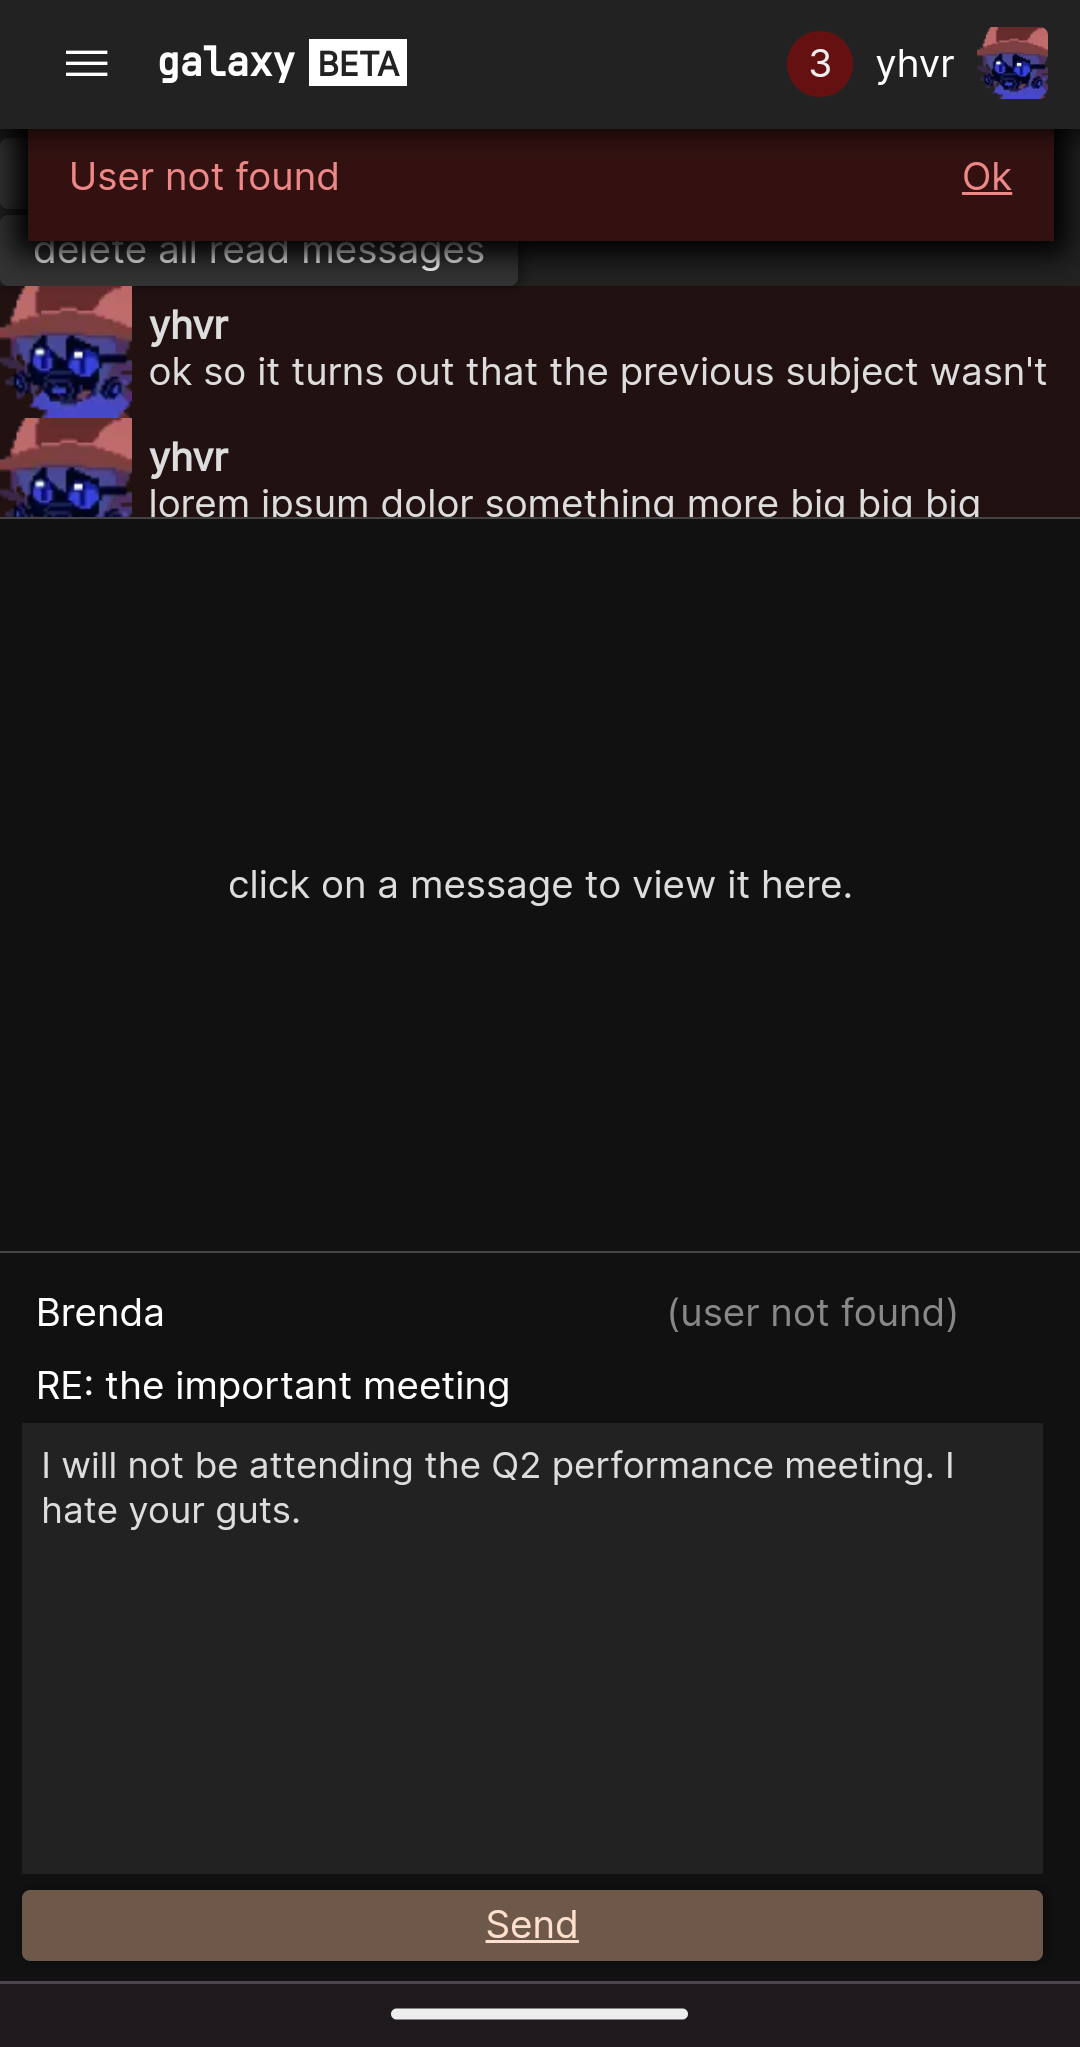 A screenshot of the inbox open up on a mobile phone. The user is composing a message to someone